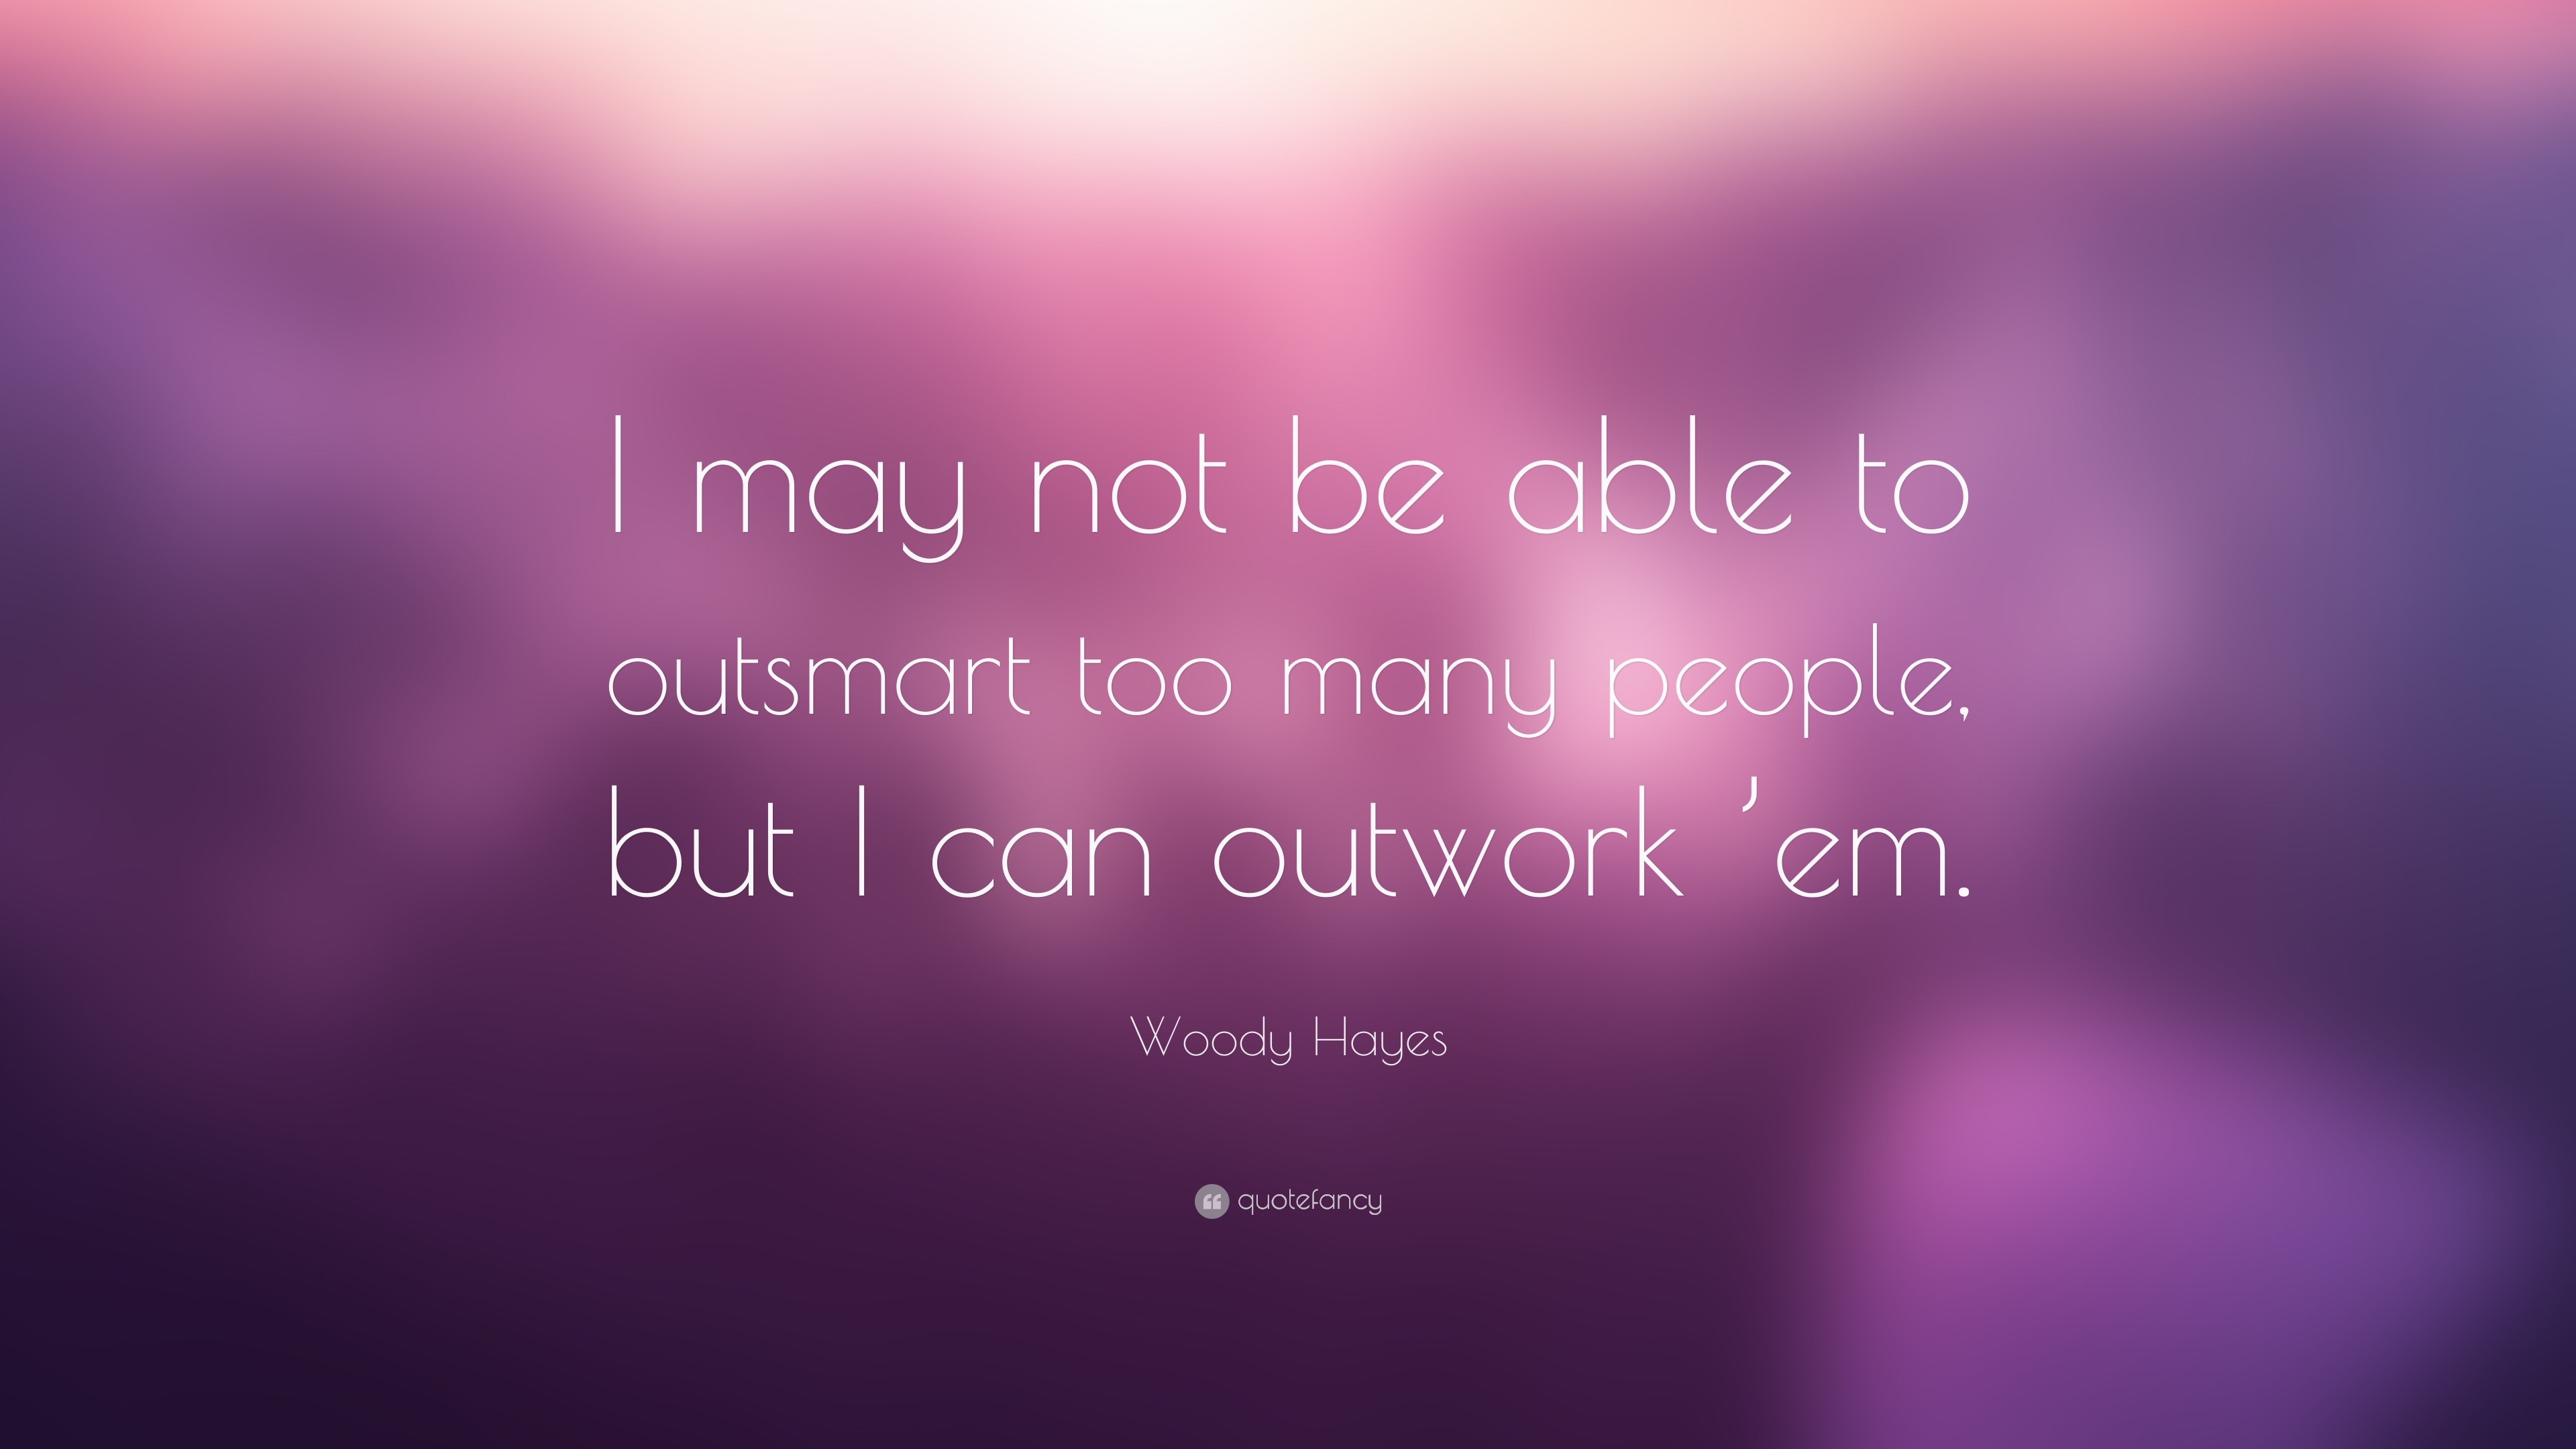 Woody Hayes Quote I May Not Be Able To Outsmart Too Many People But I Can Outwork Em 7 Wallpapers Quotefancy